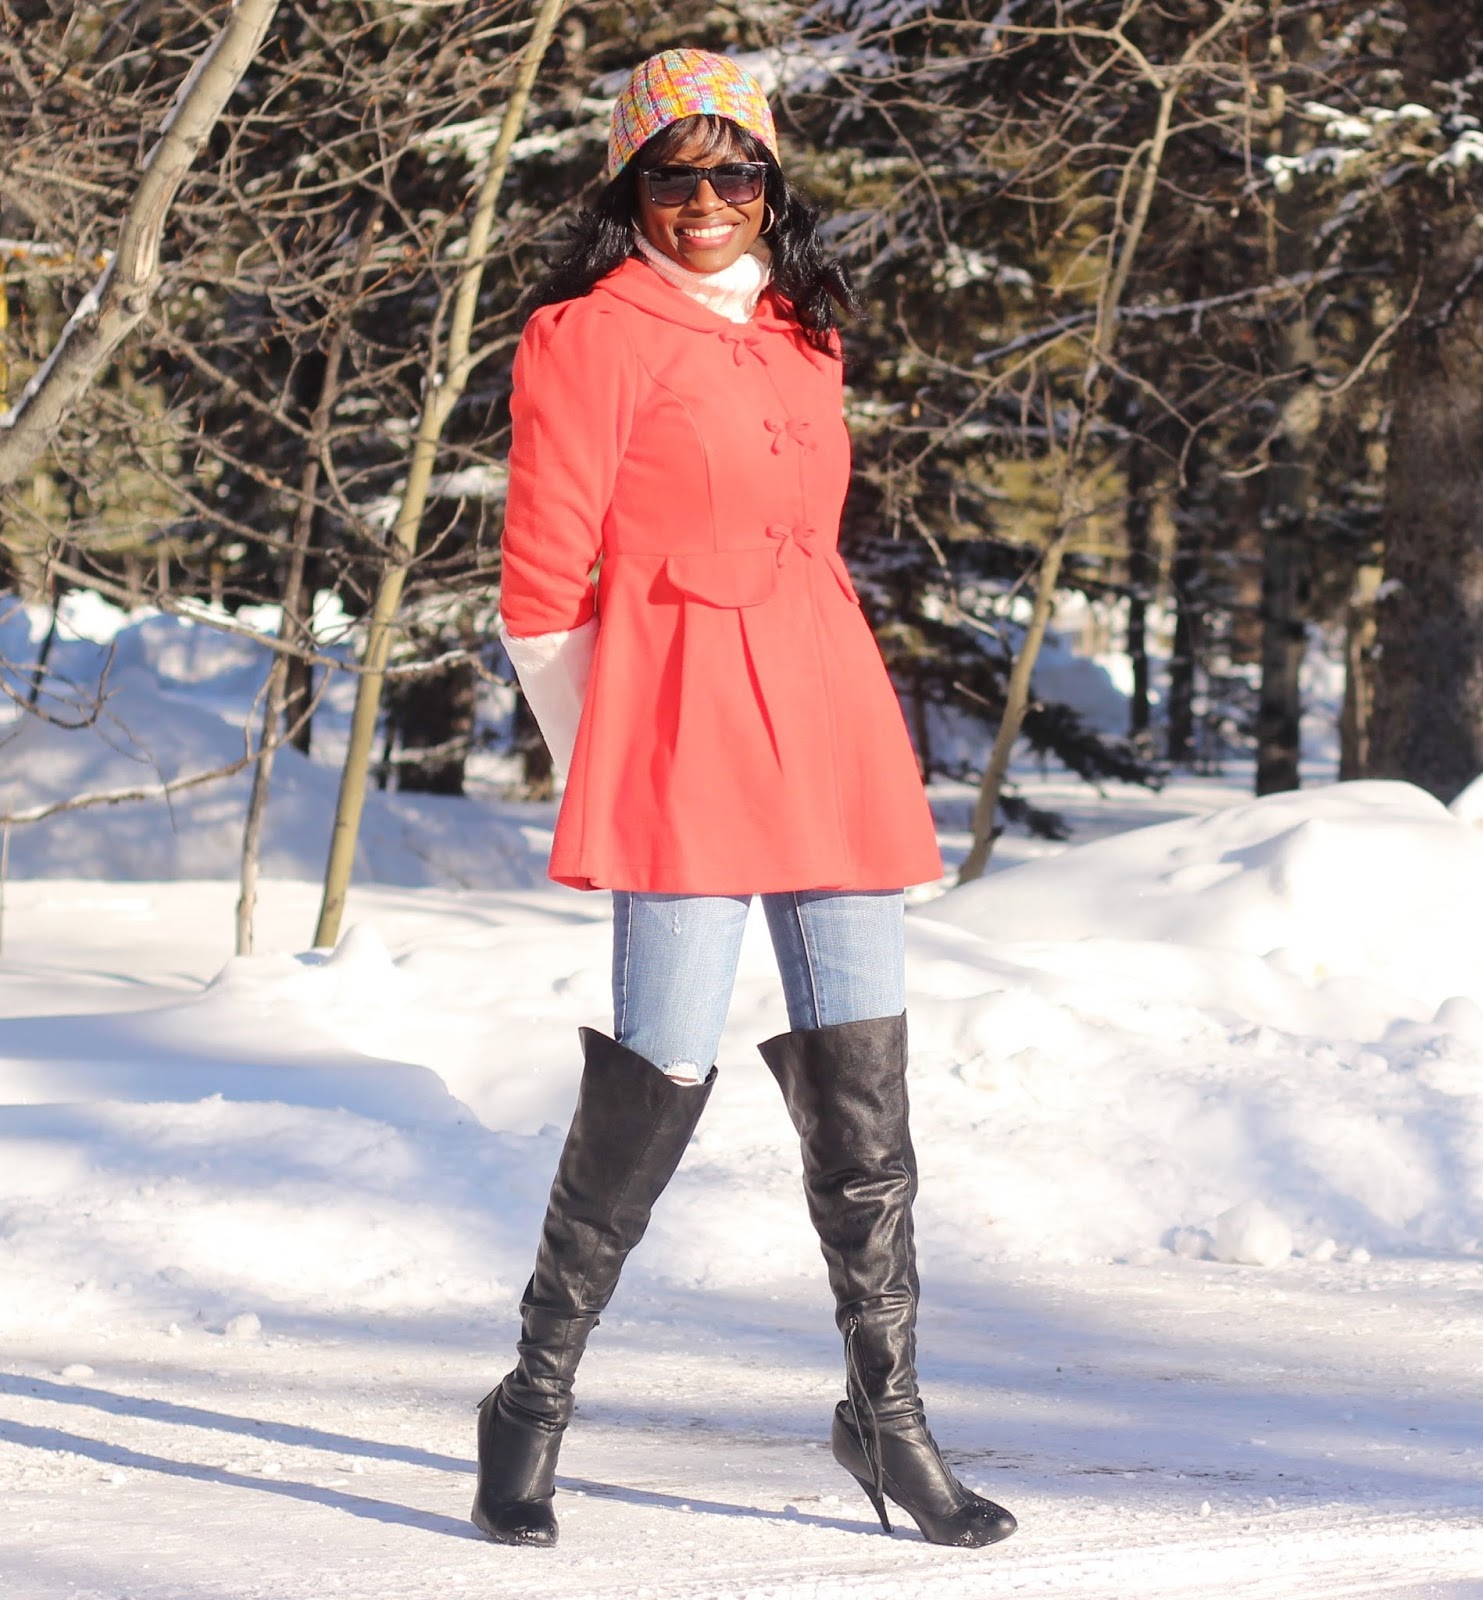 Coat dress styled with over the knee boots